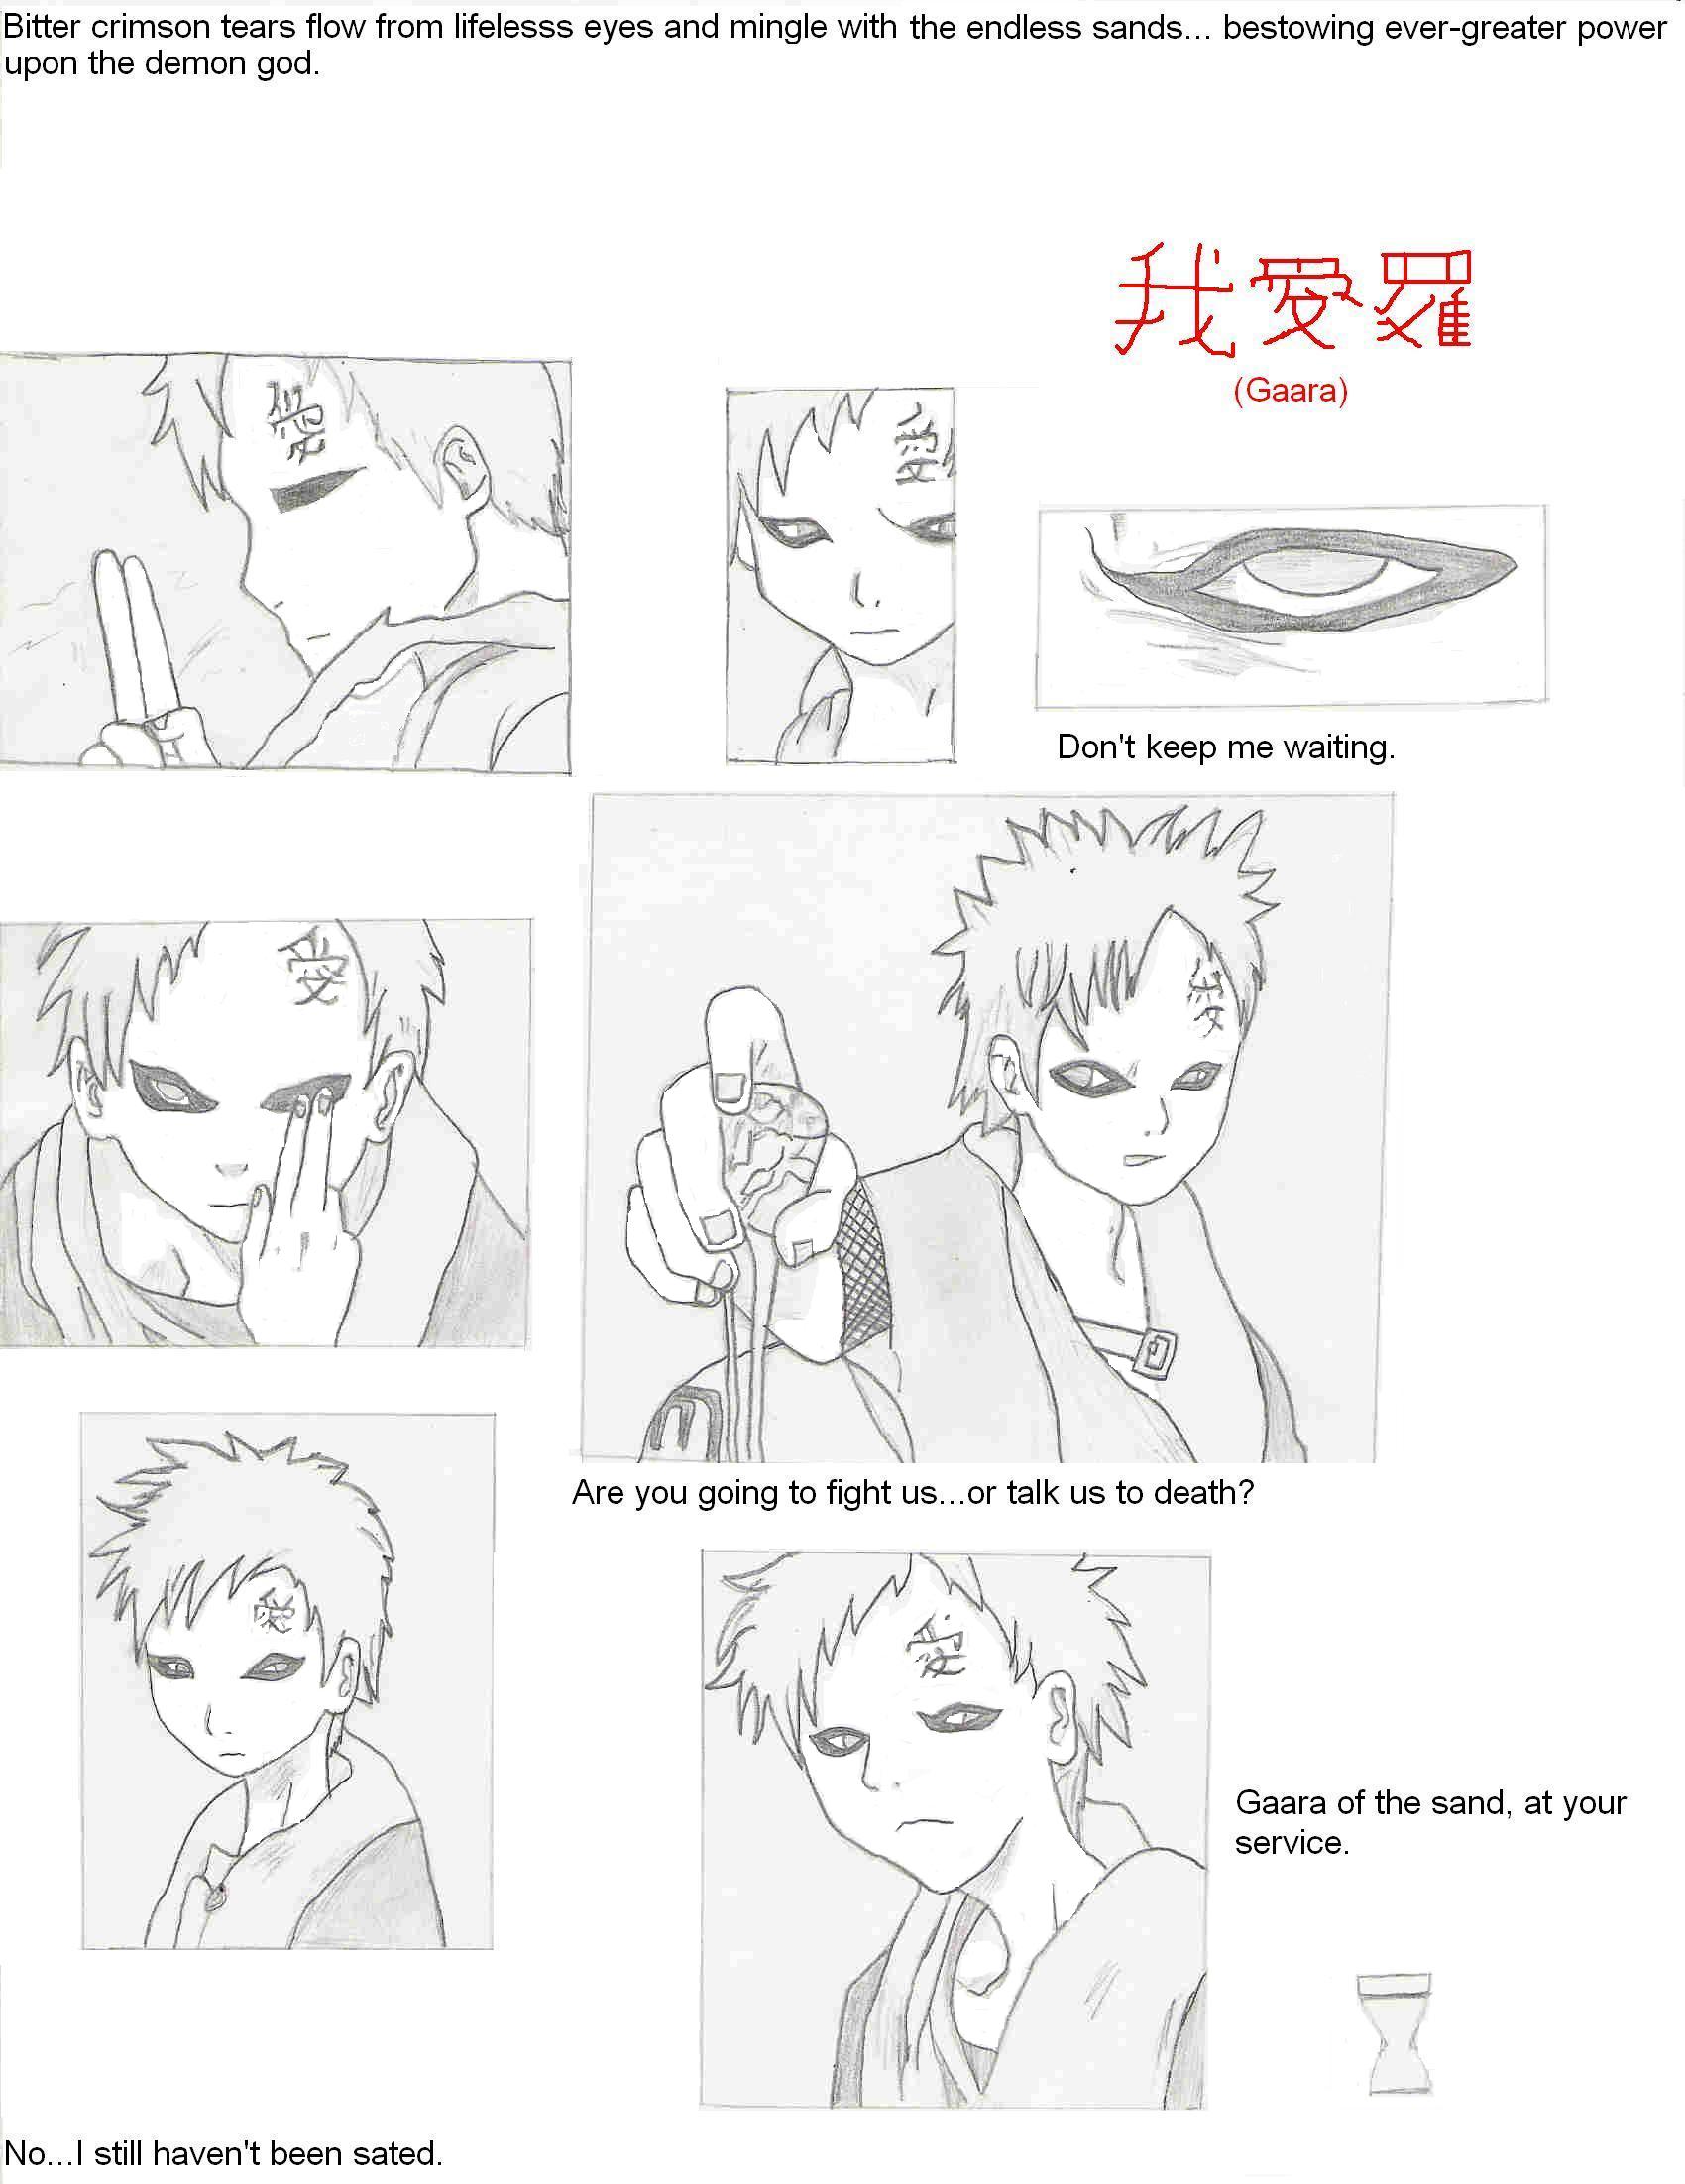 Gaara collage by Hieis_lover_and_obsessor